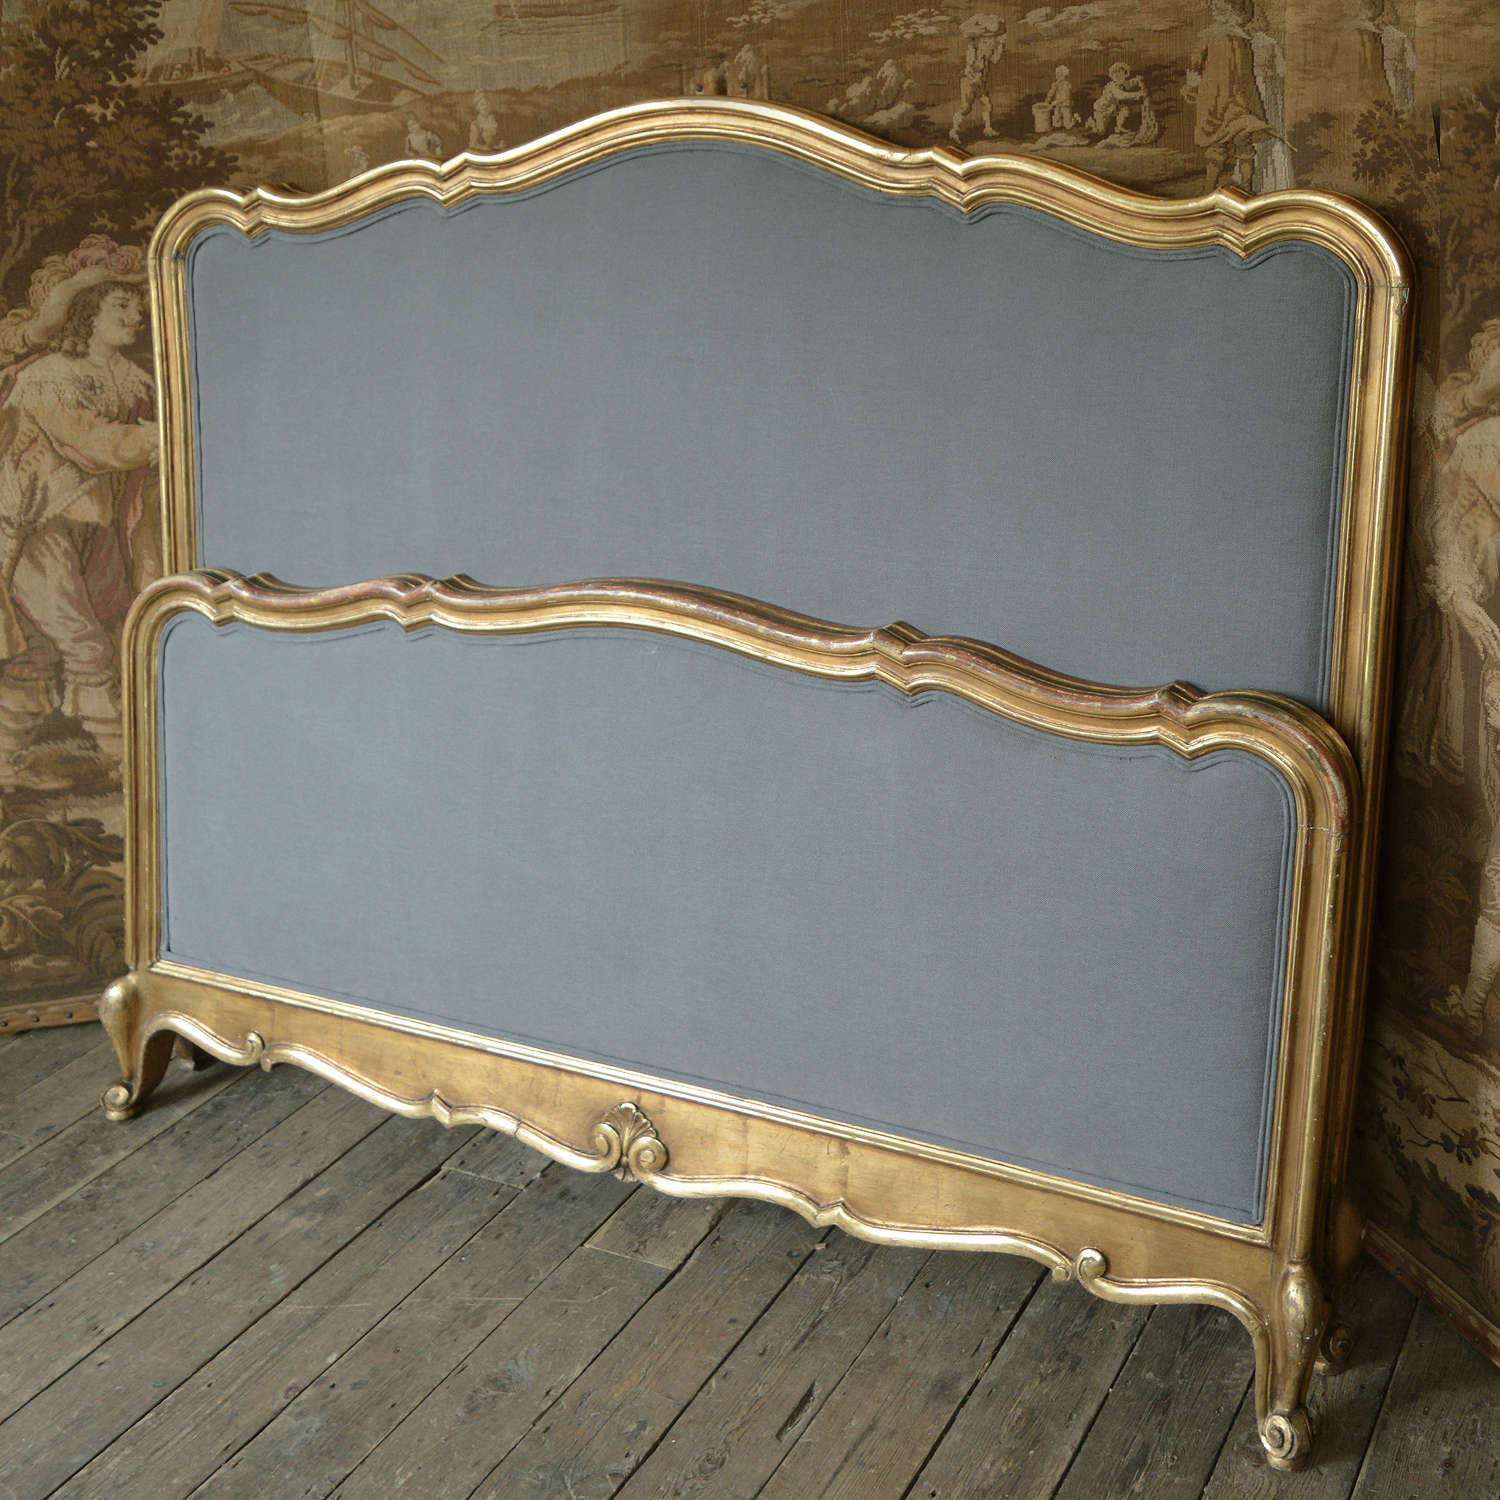 1920's Giltwood Italian bedstead, Large king-size